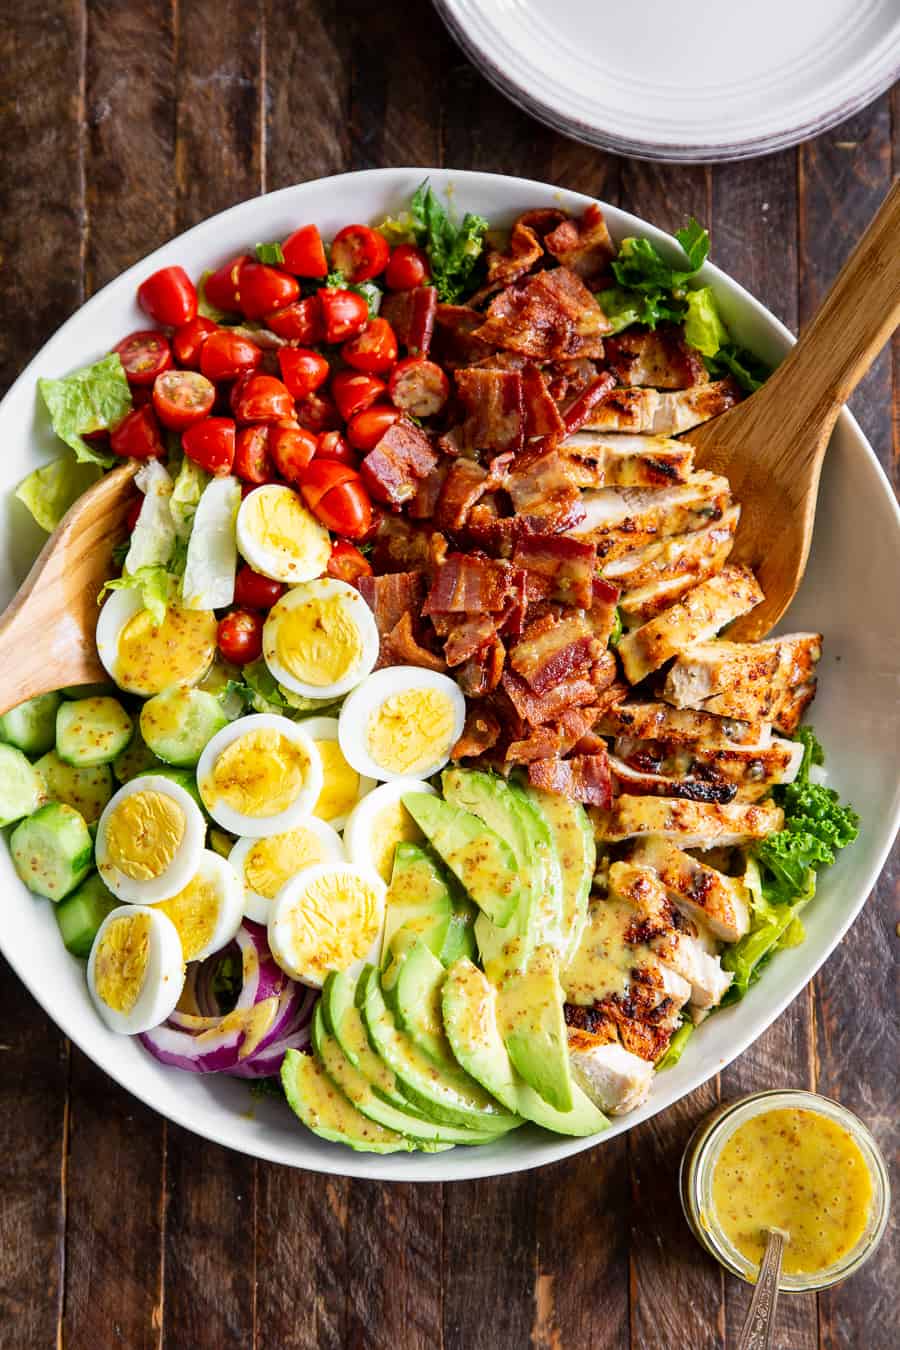 Summer Berry & Candied Bacon Cobb Salad